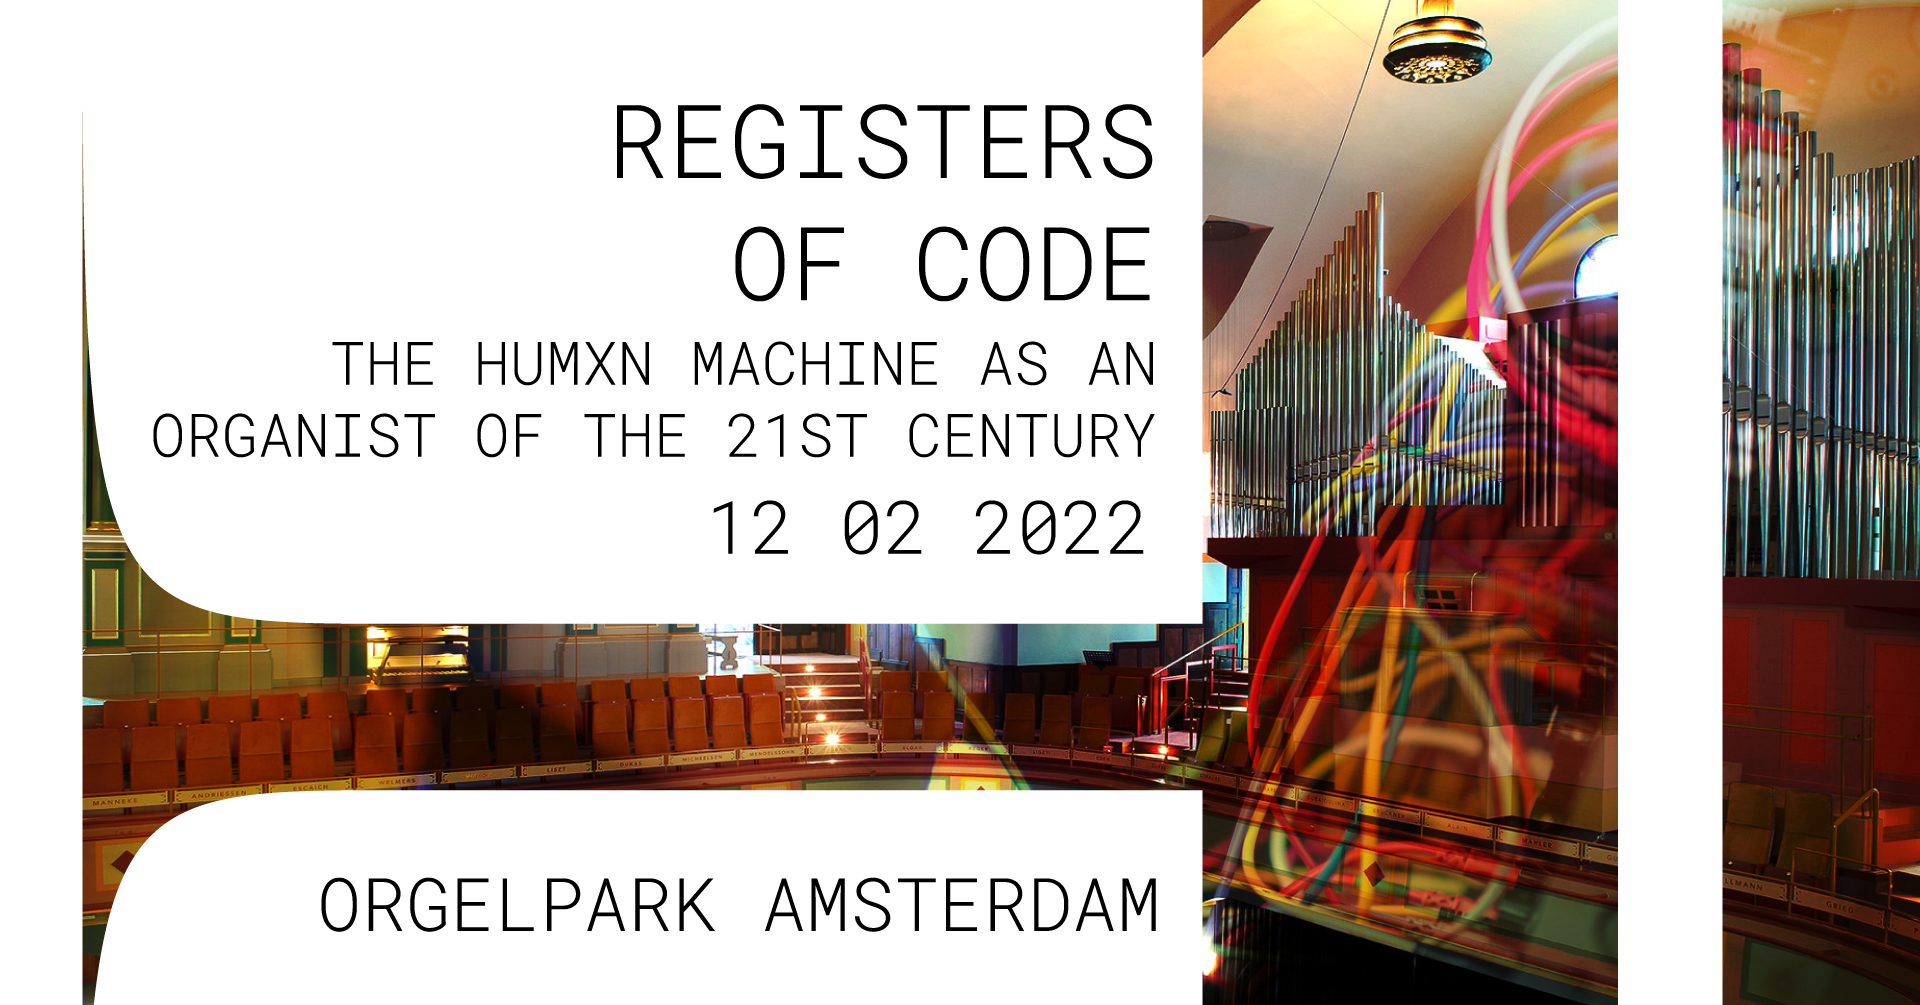 REGISTERS OF CODE: The humxn machine as an organist of the 21st century